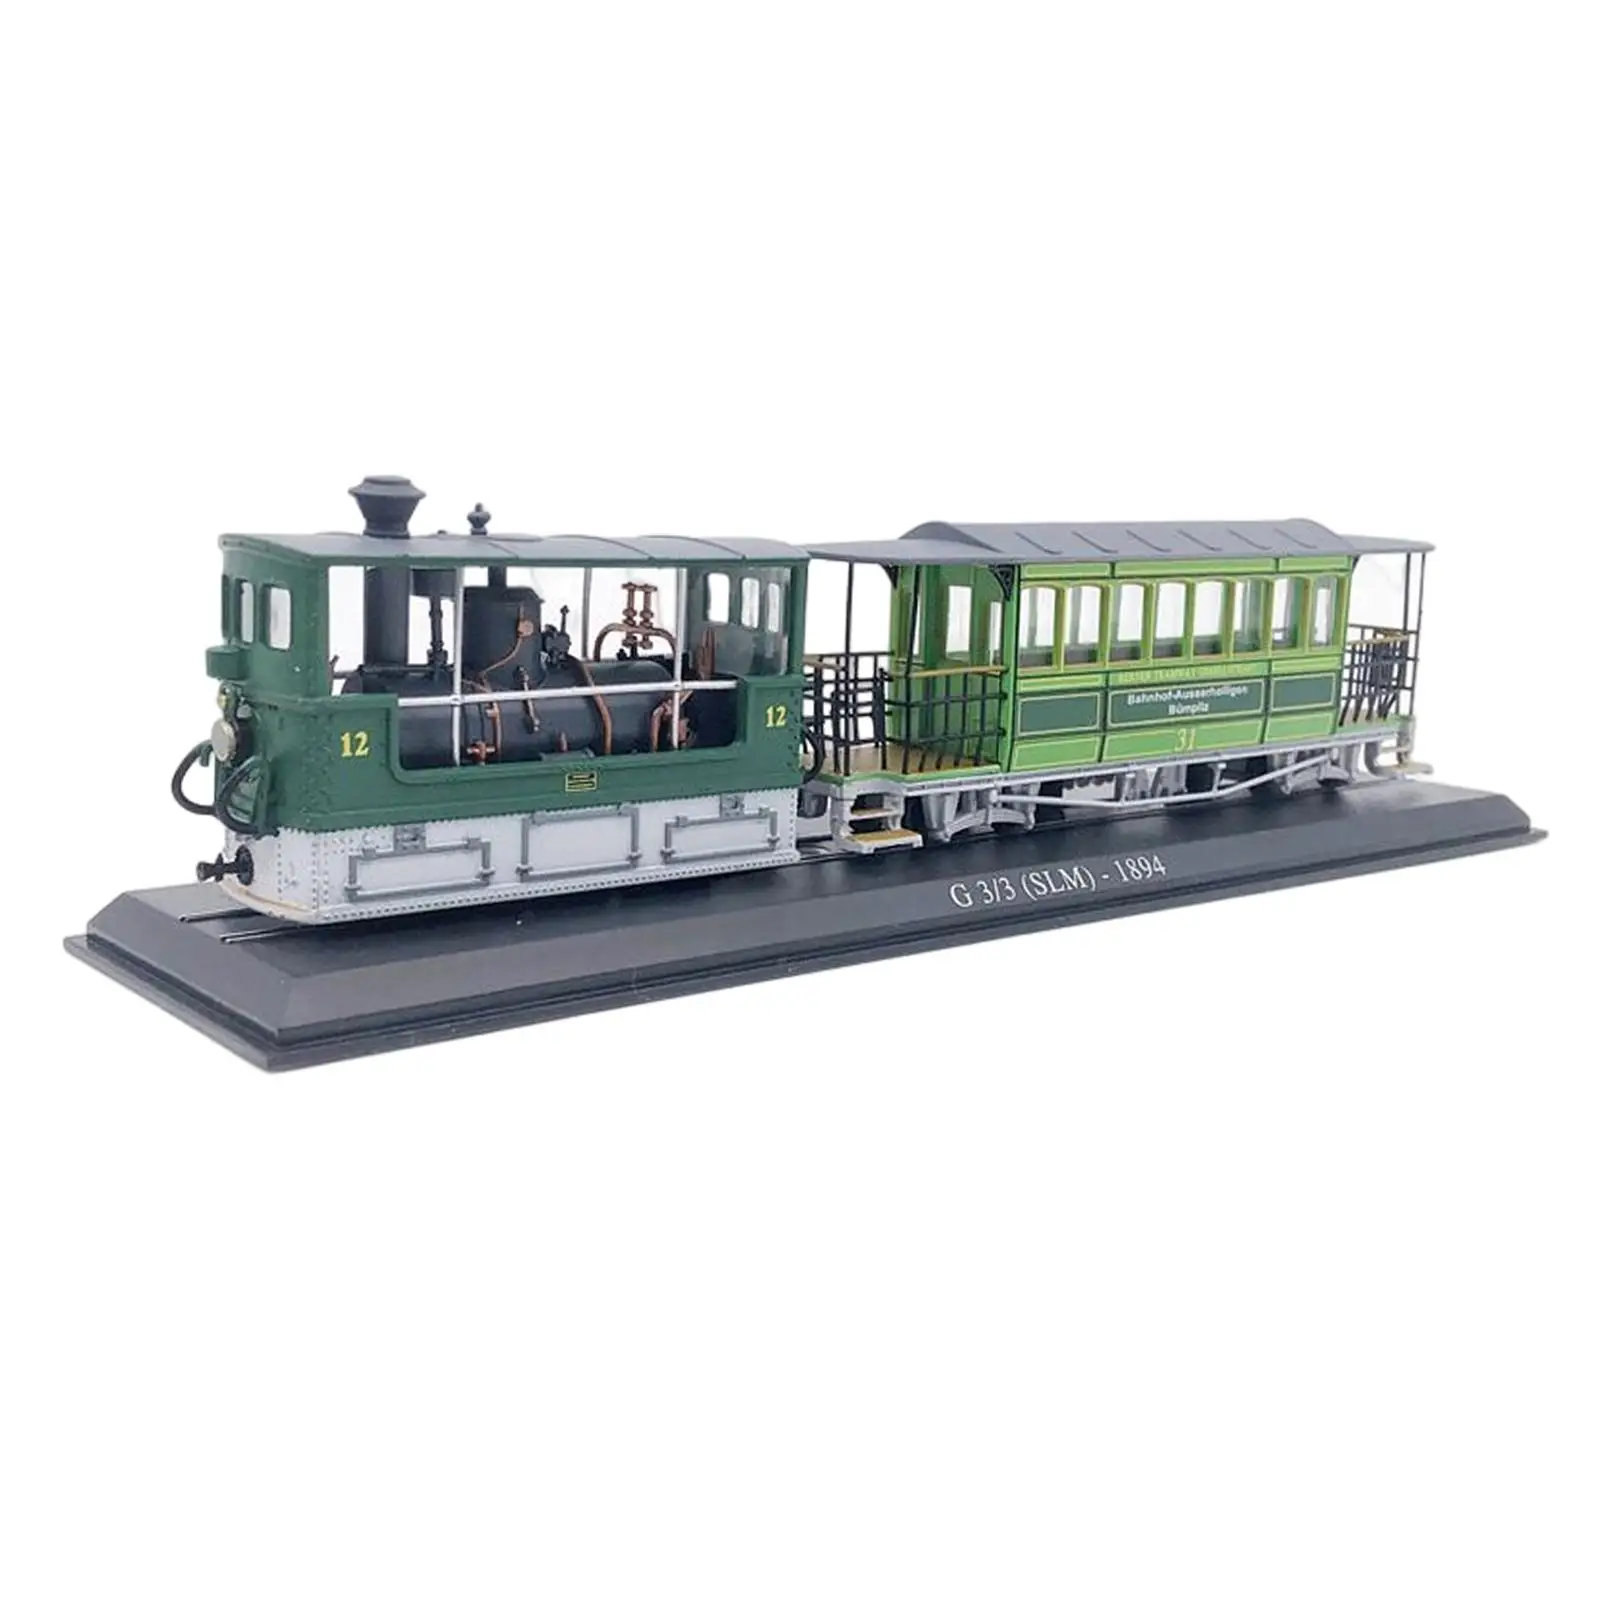 1/87 Trains Model Decorative Collection Durable for Adult Kids Beginners